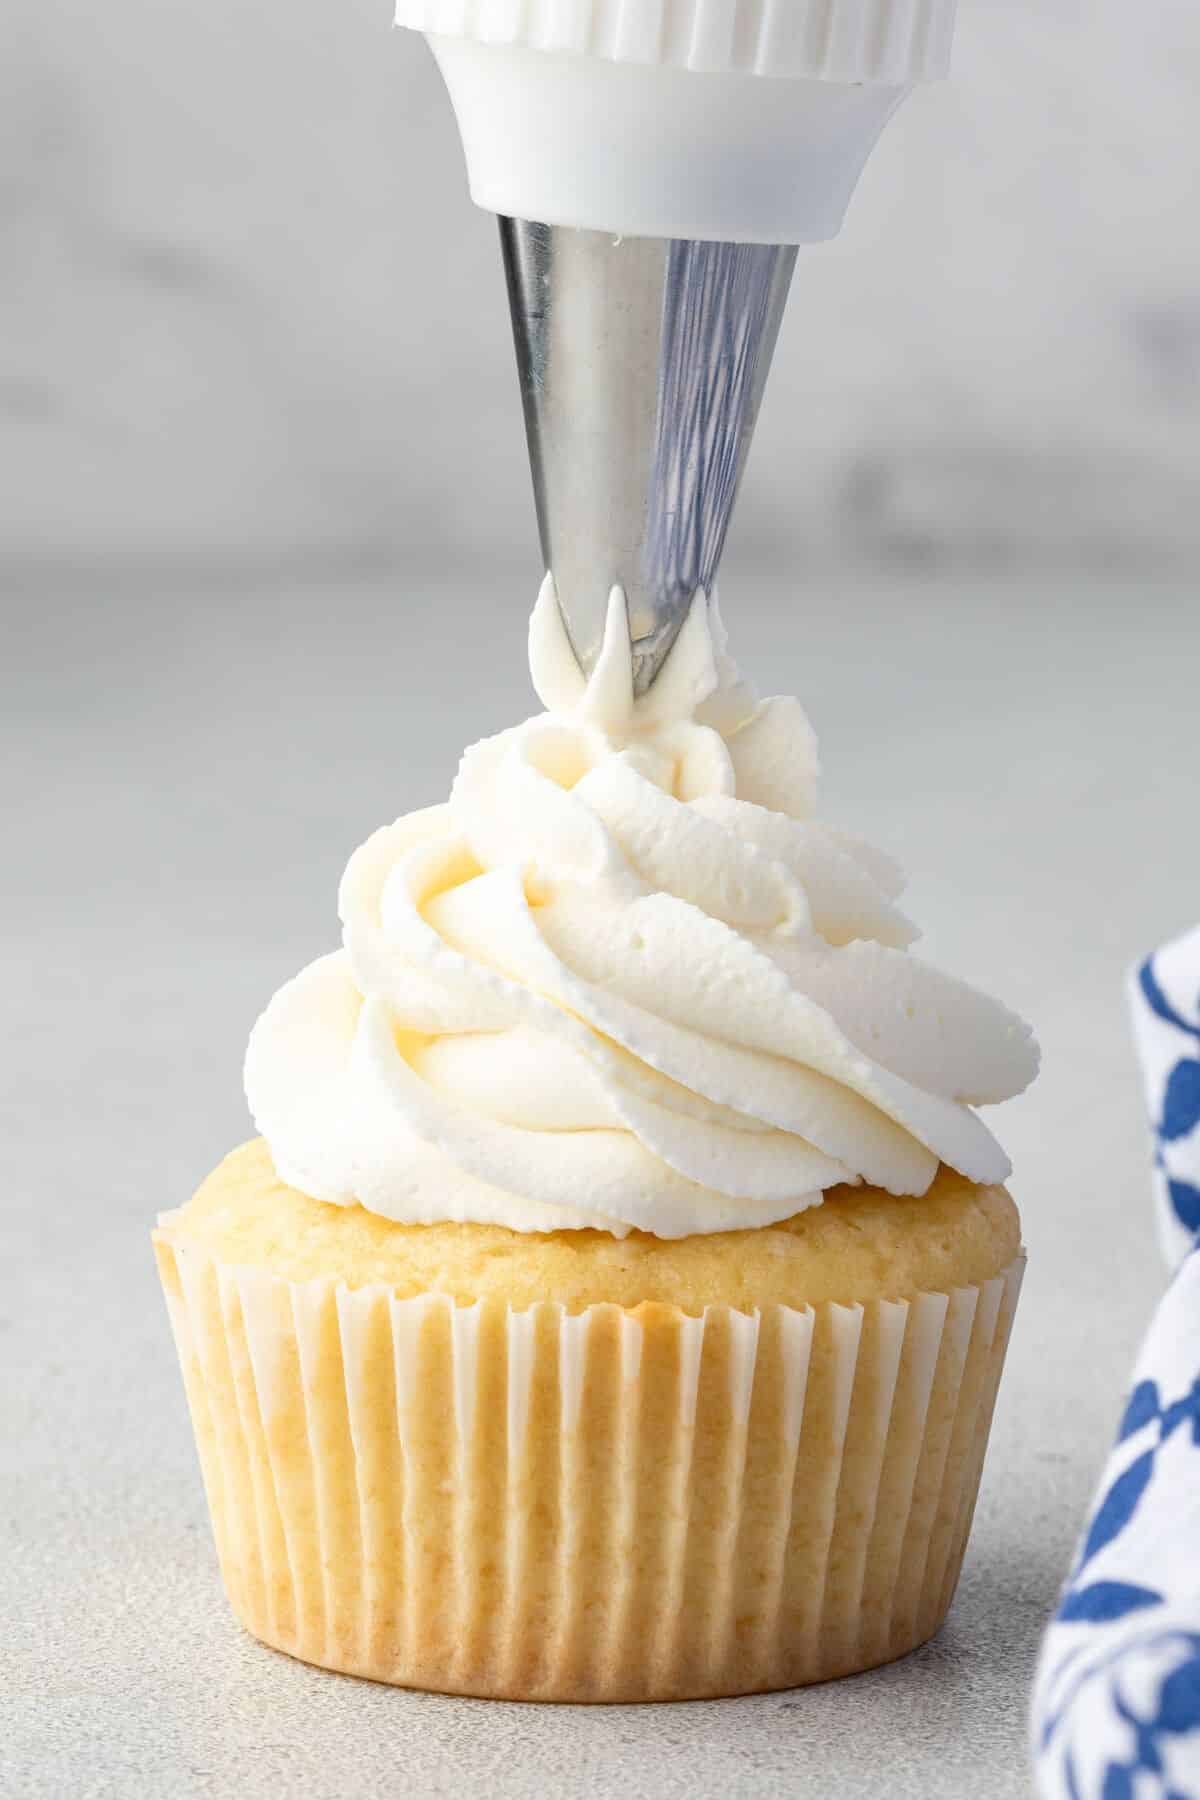 Piping stabilized whipped cream frosting onto a vanilla cupcake.